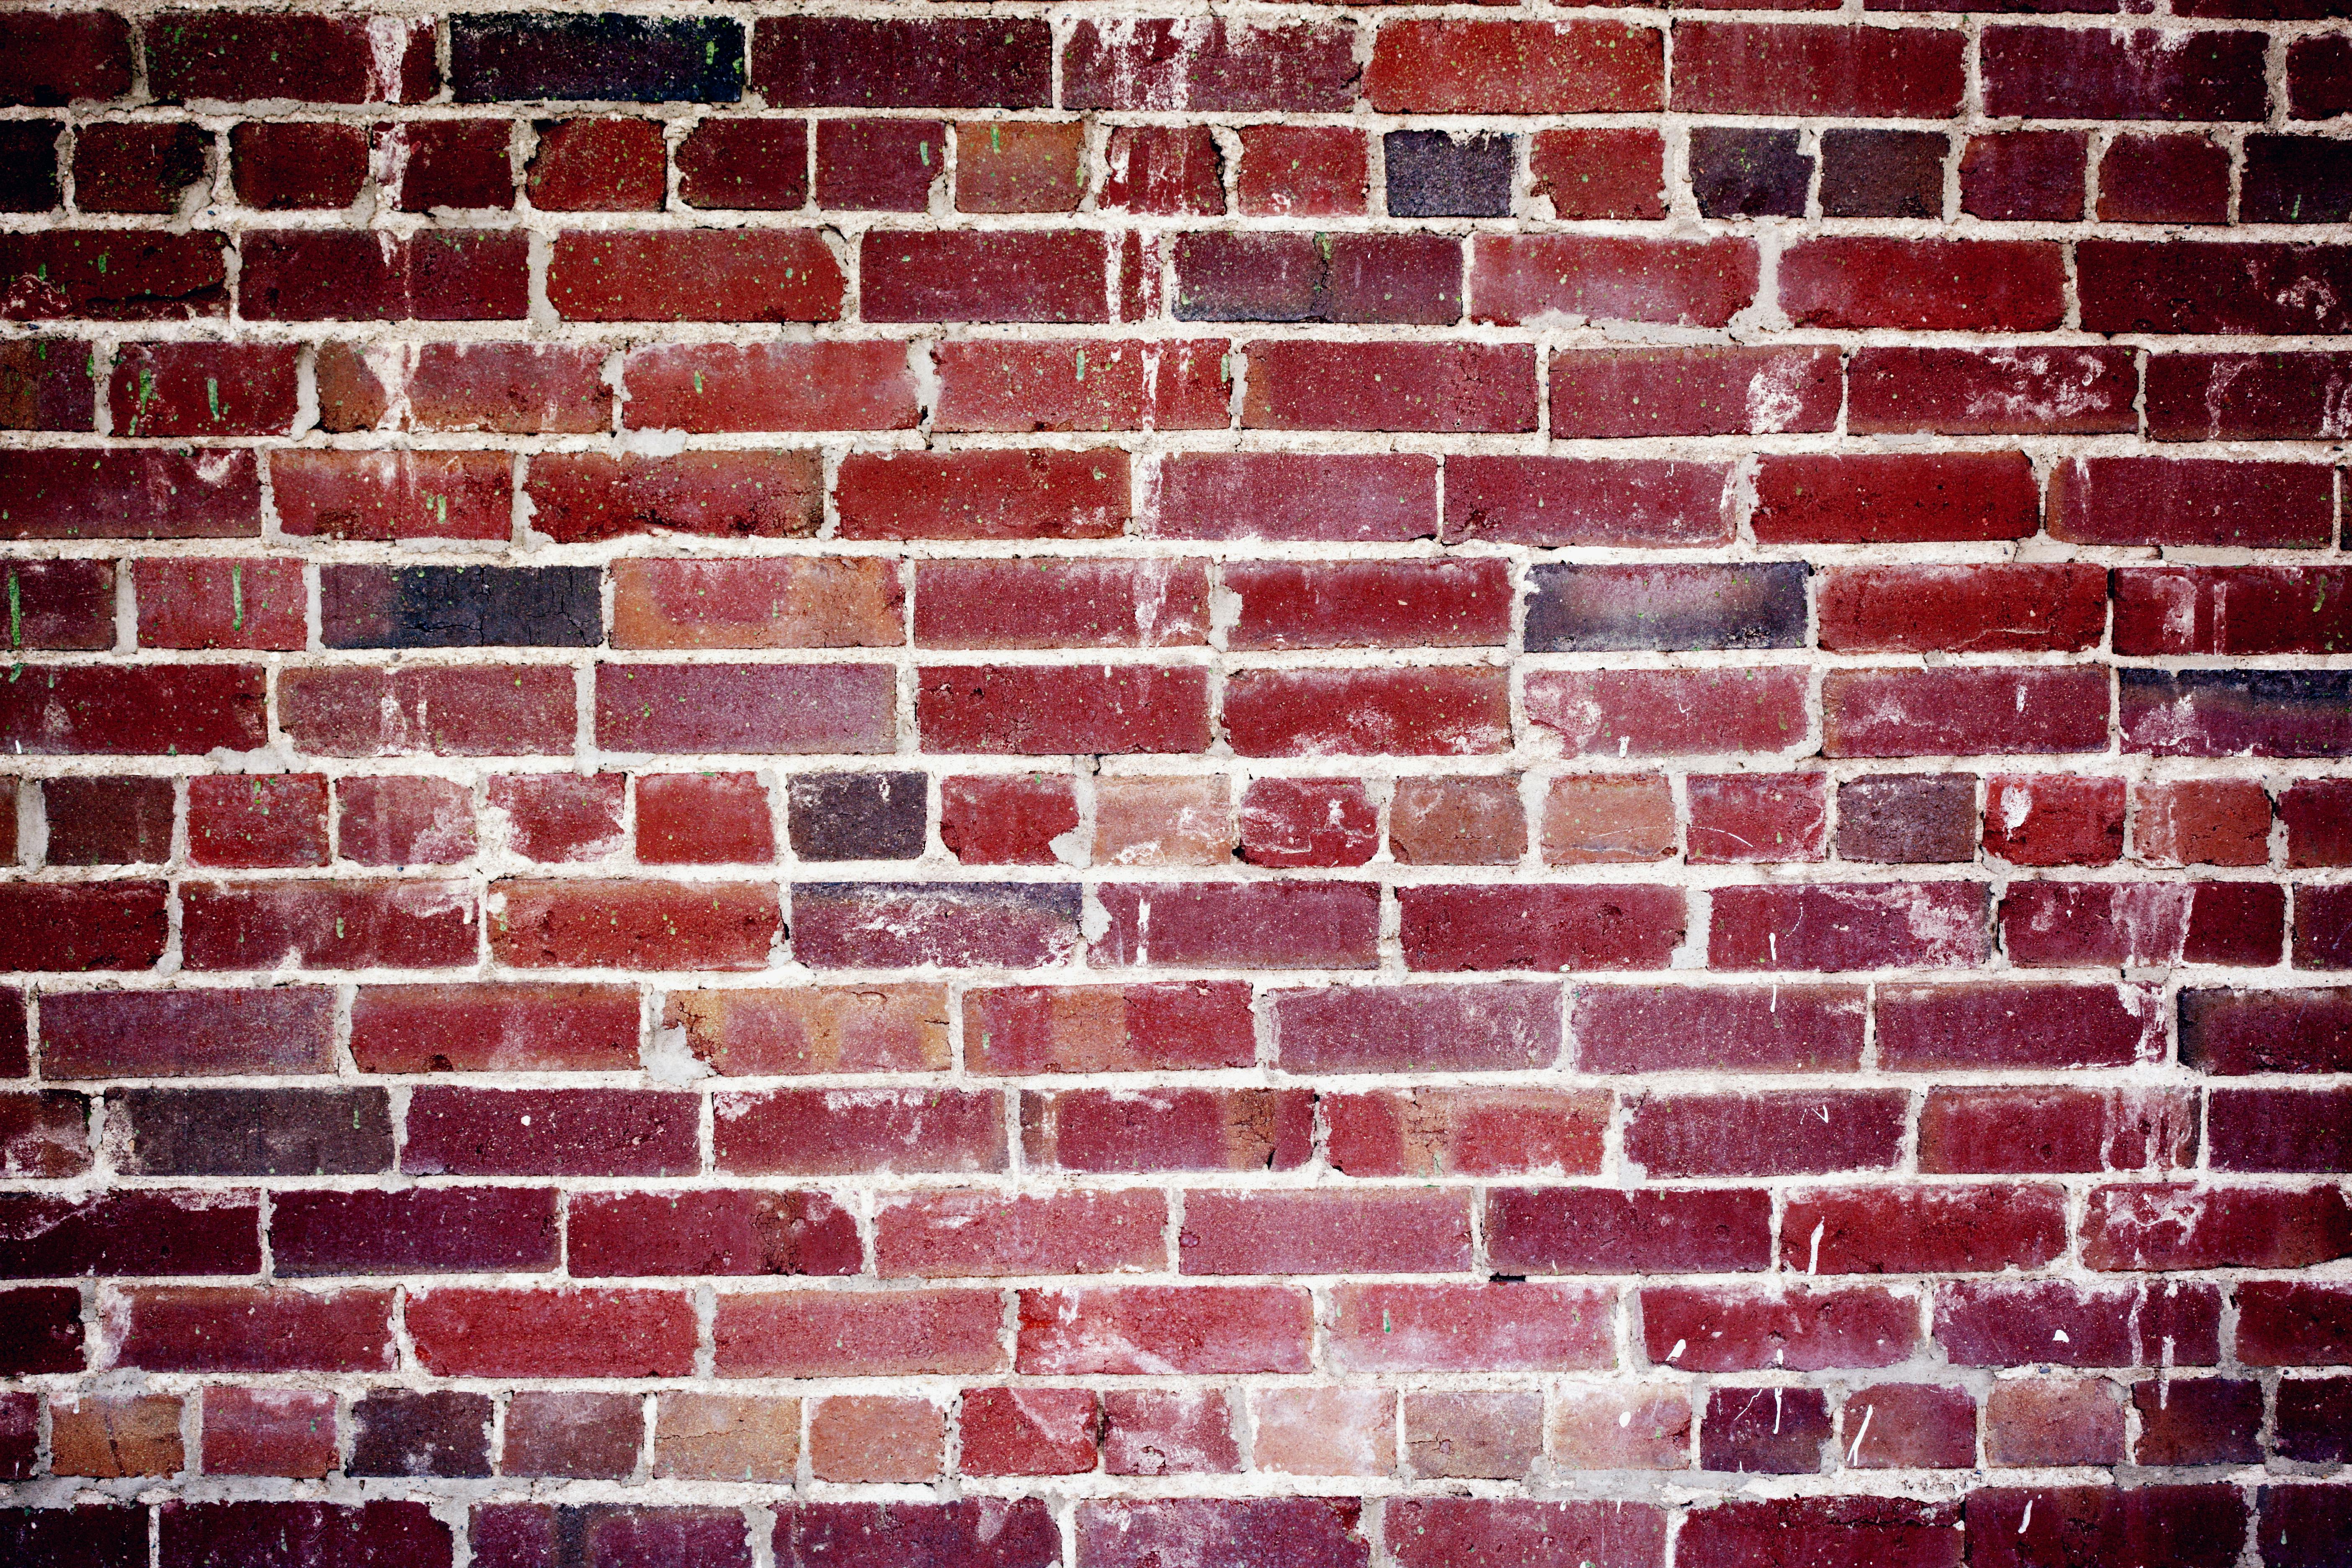 Modern Rustic Brick Design Wallpapers | Buy Online in South Africa |  takealot.com